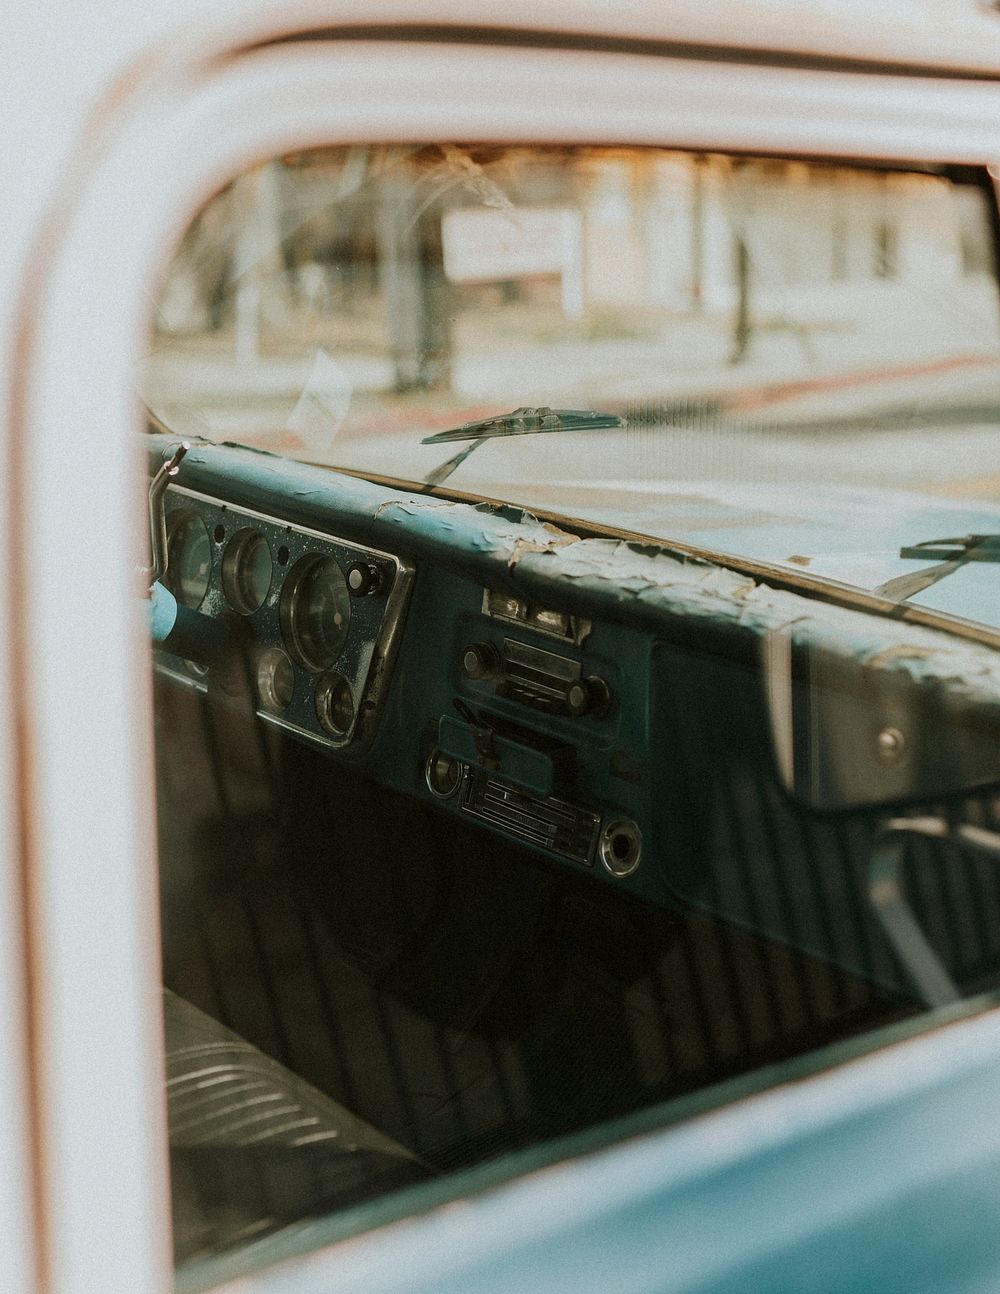 Interior of an old classic car